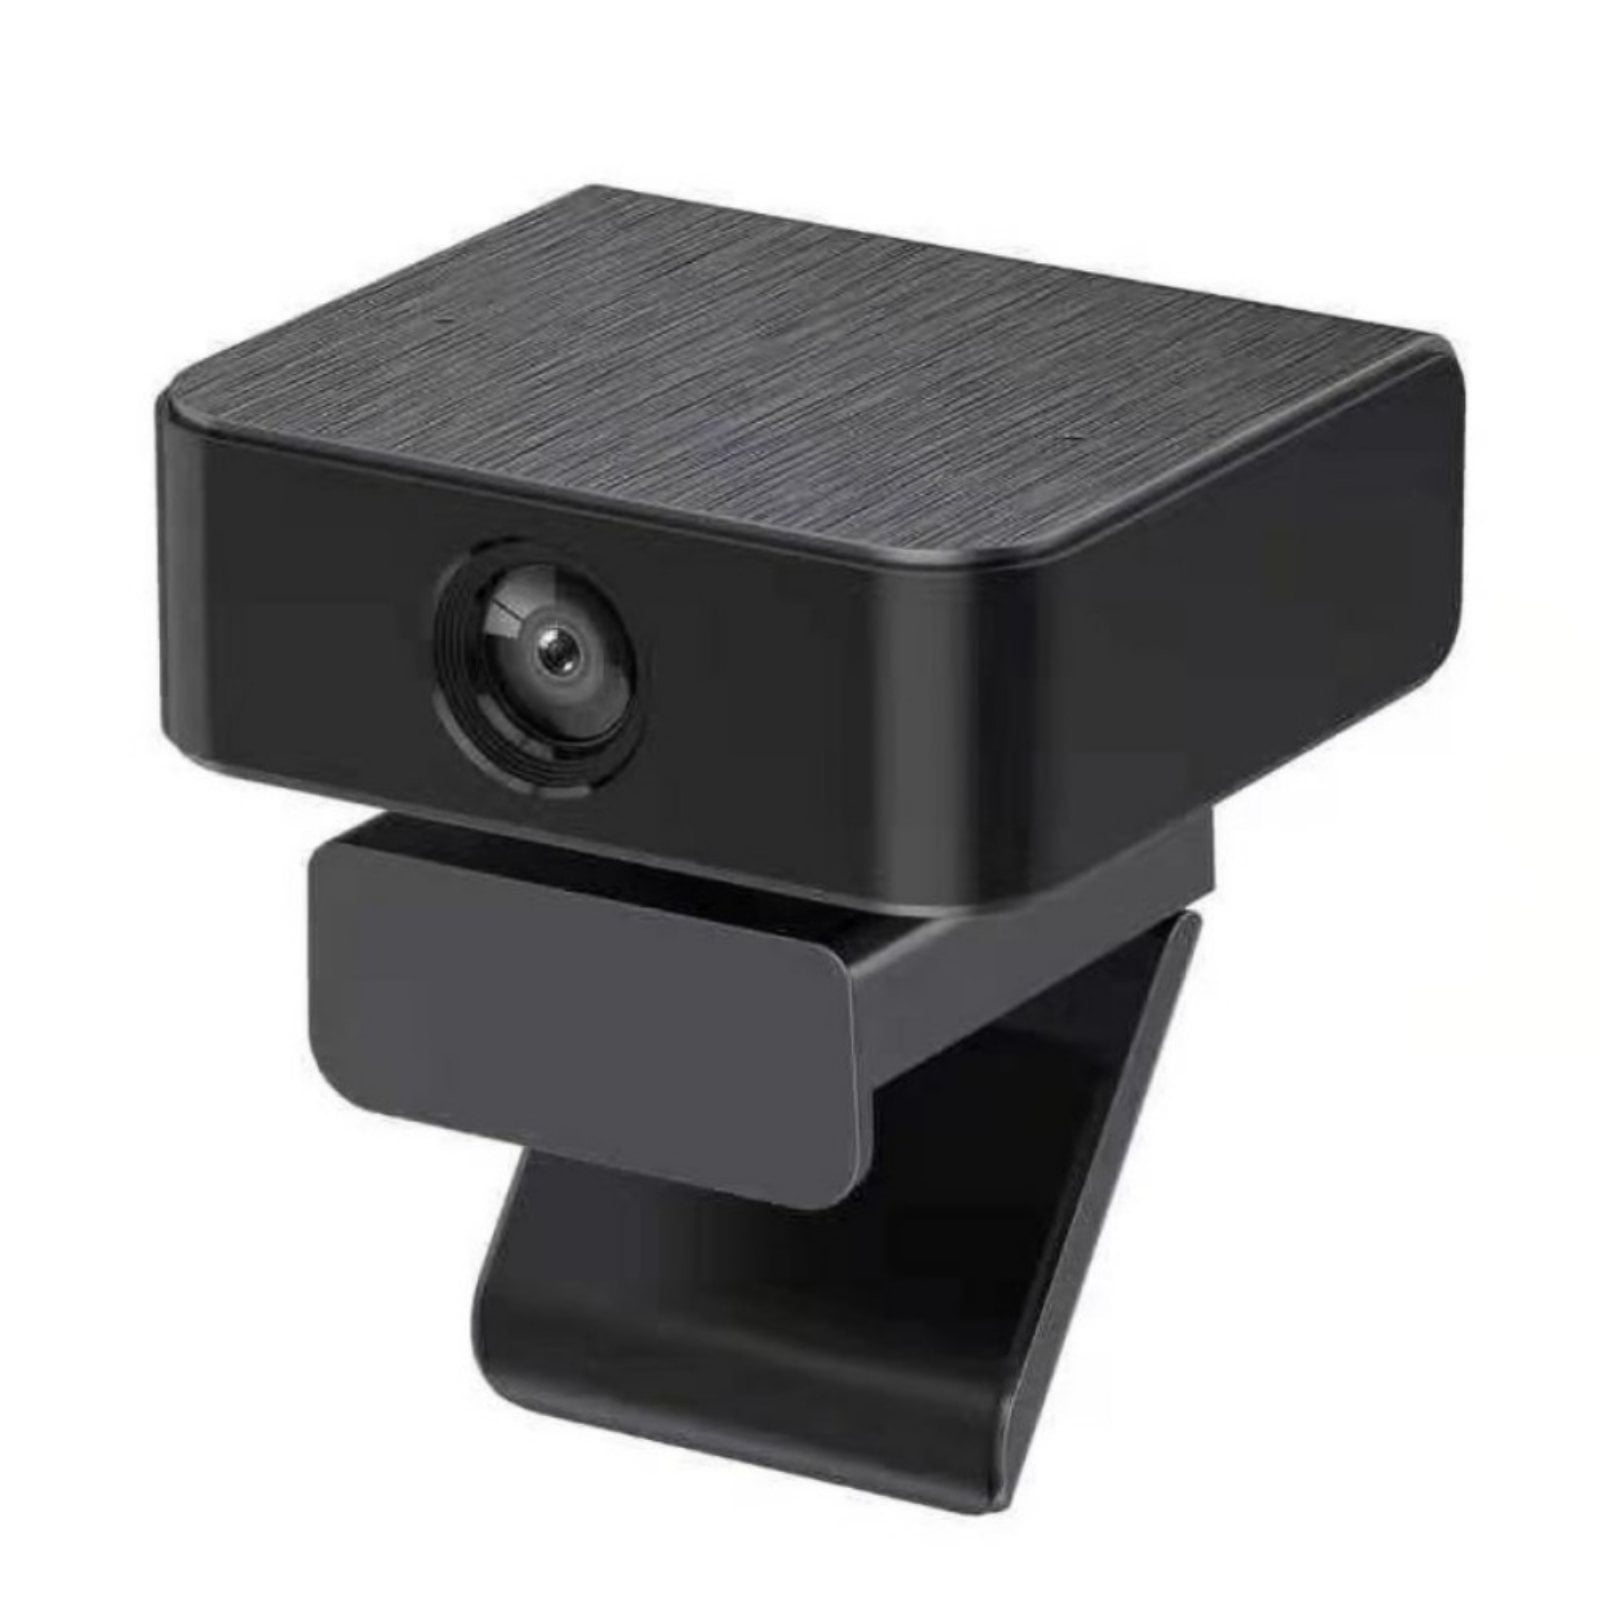 360-Degree Rotation Noise Reduction Streaming Web Camera for Studying Online 1080P HD Webcam with Microphone Recording Video Conferencing USB Port Plug and Play 